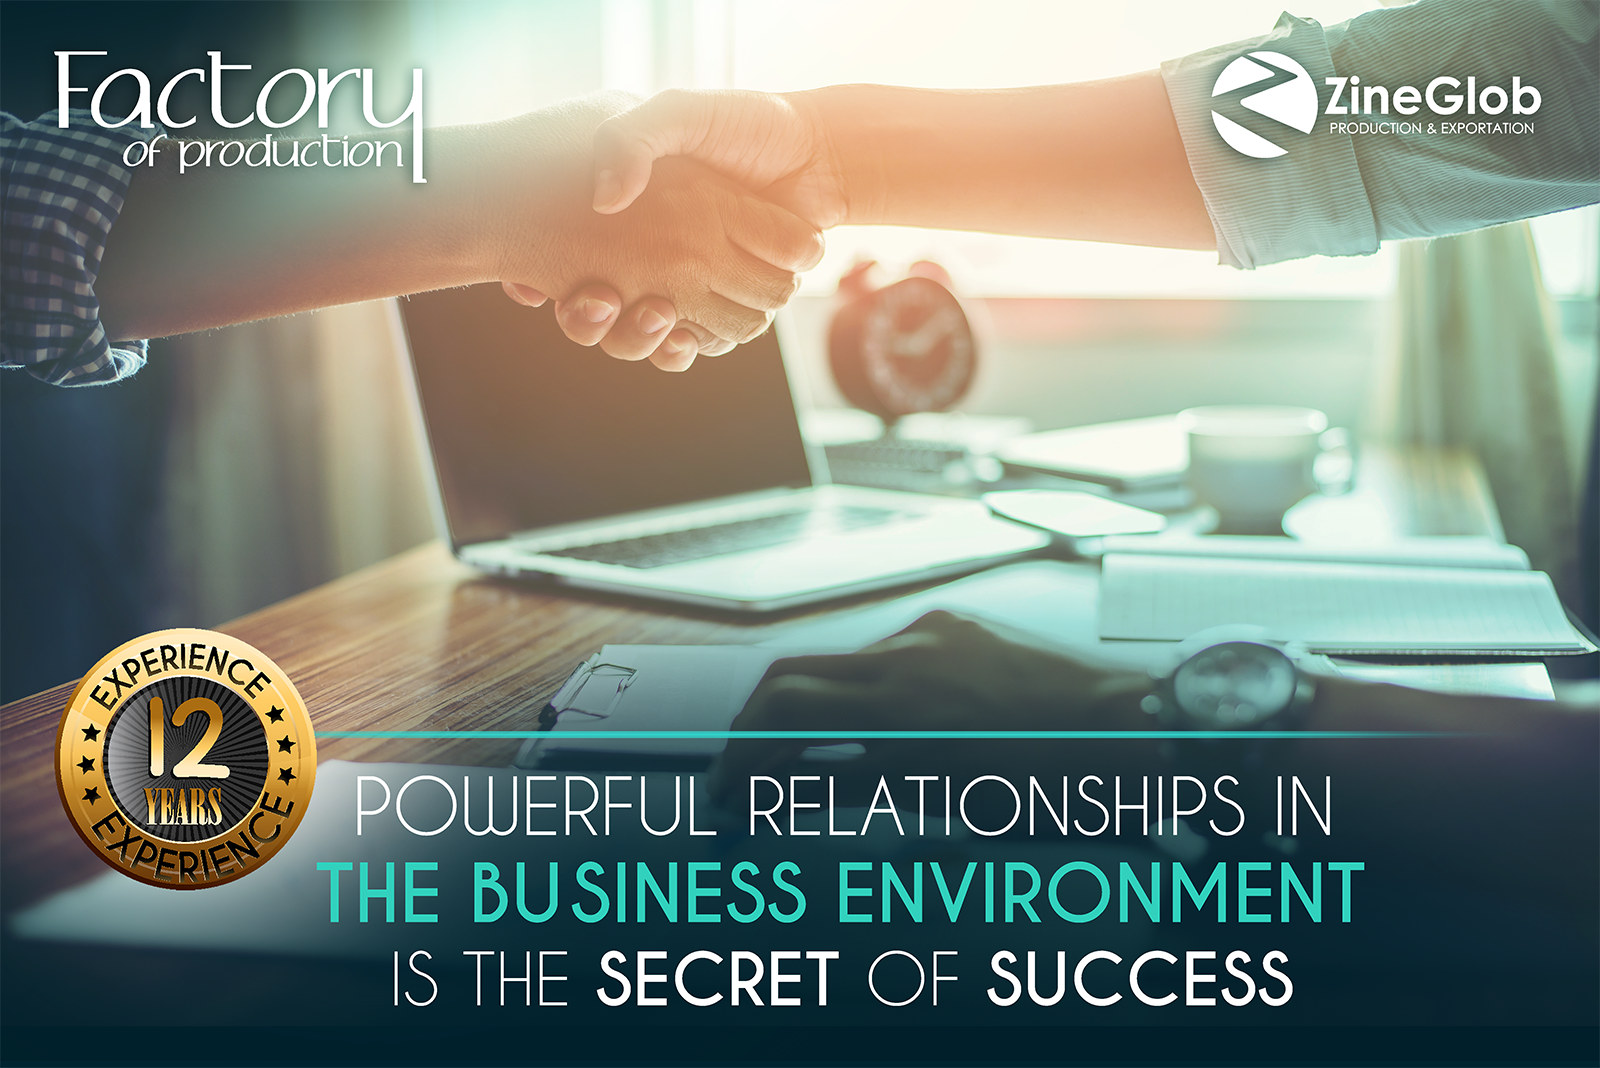 POWERFUL RELATIONSHIPS IN THE BUSINESS ENVIRONMENT IS THE SECRET OF SUCCESS